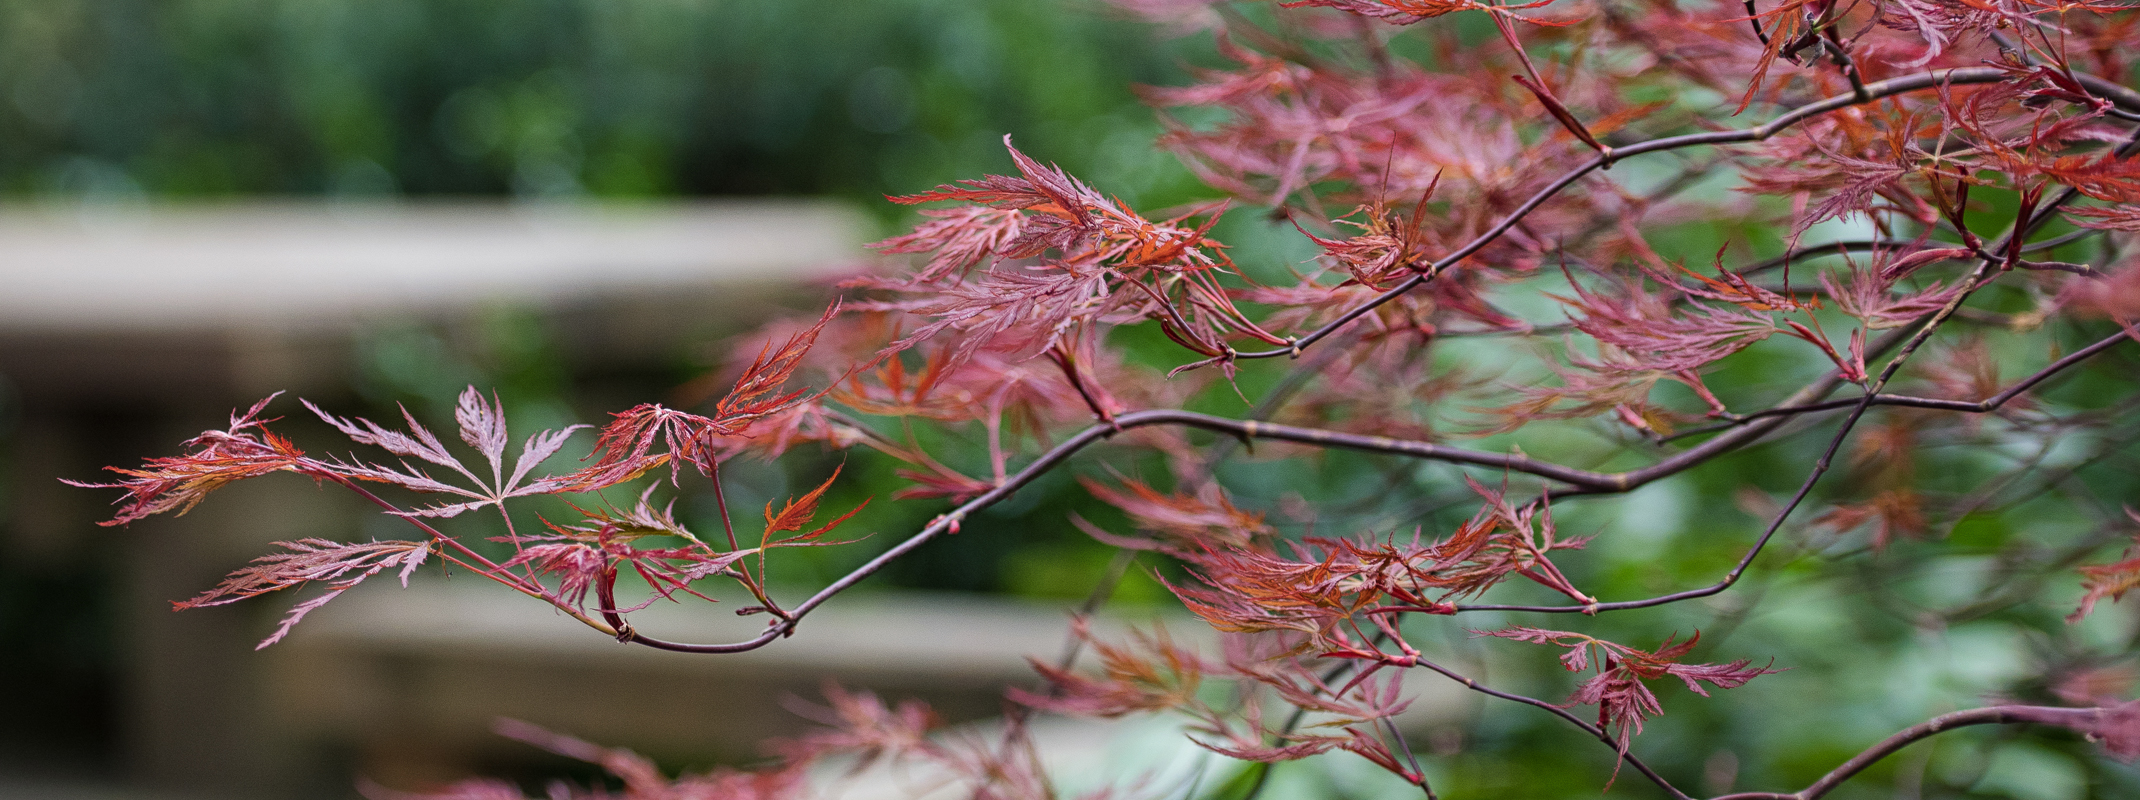 Japanese Maple tree branches close up